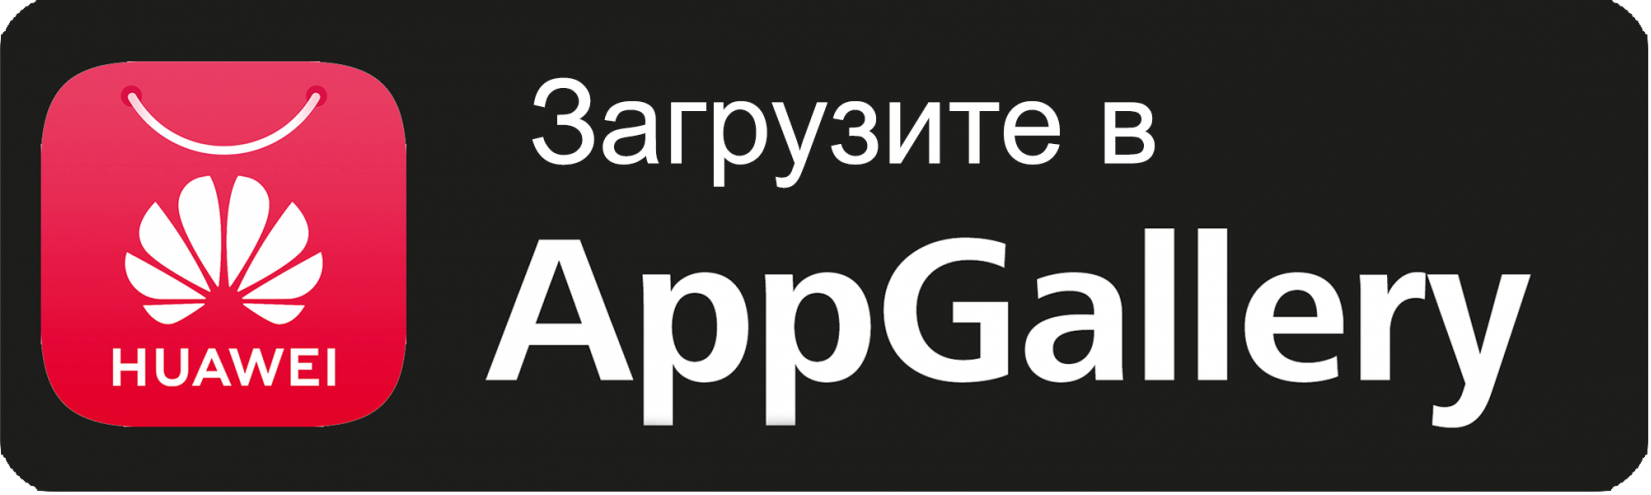 HW_APPGALLERY.png